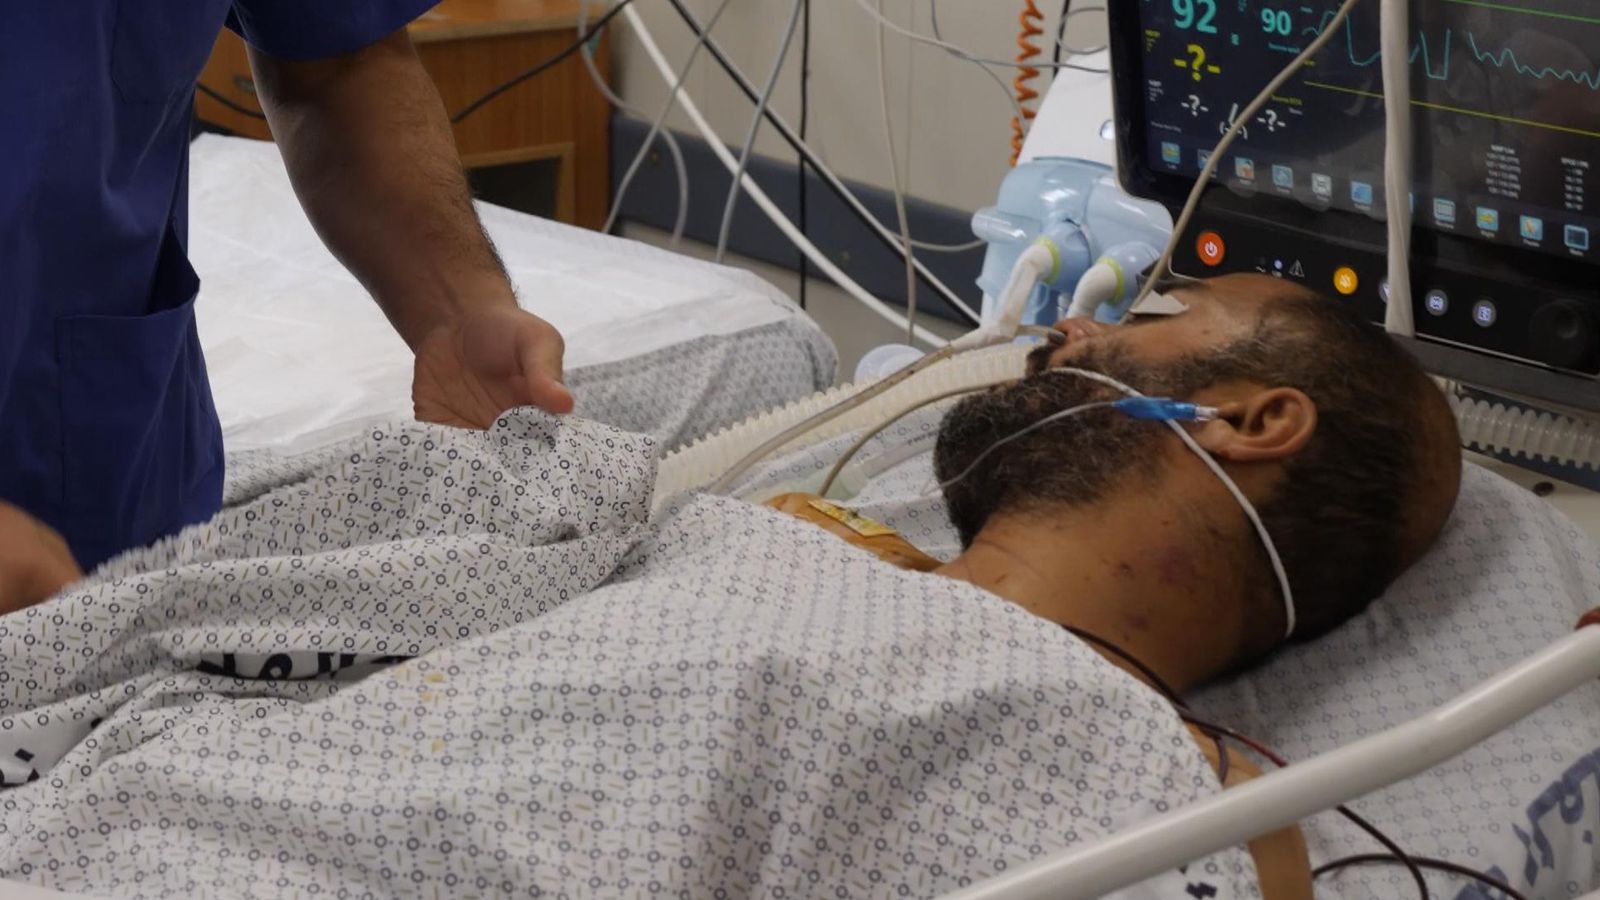 ‘He was trying to escape the heat’: One more casualty in Gaza’s incurable conflict